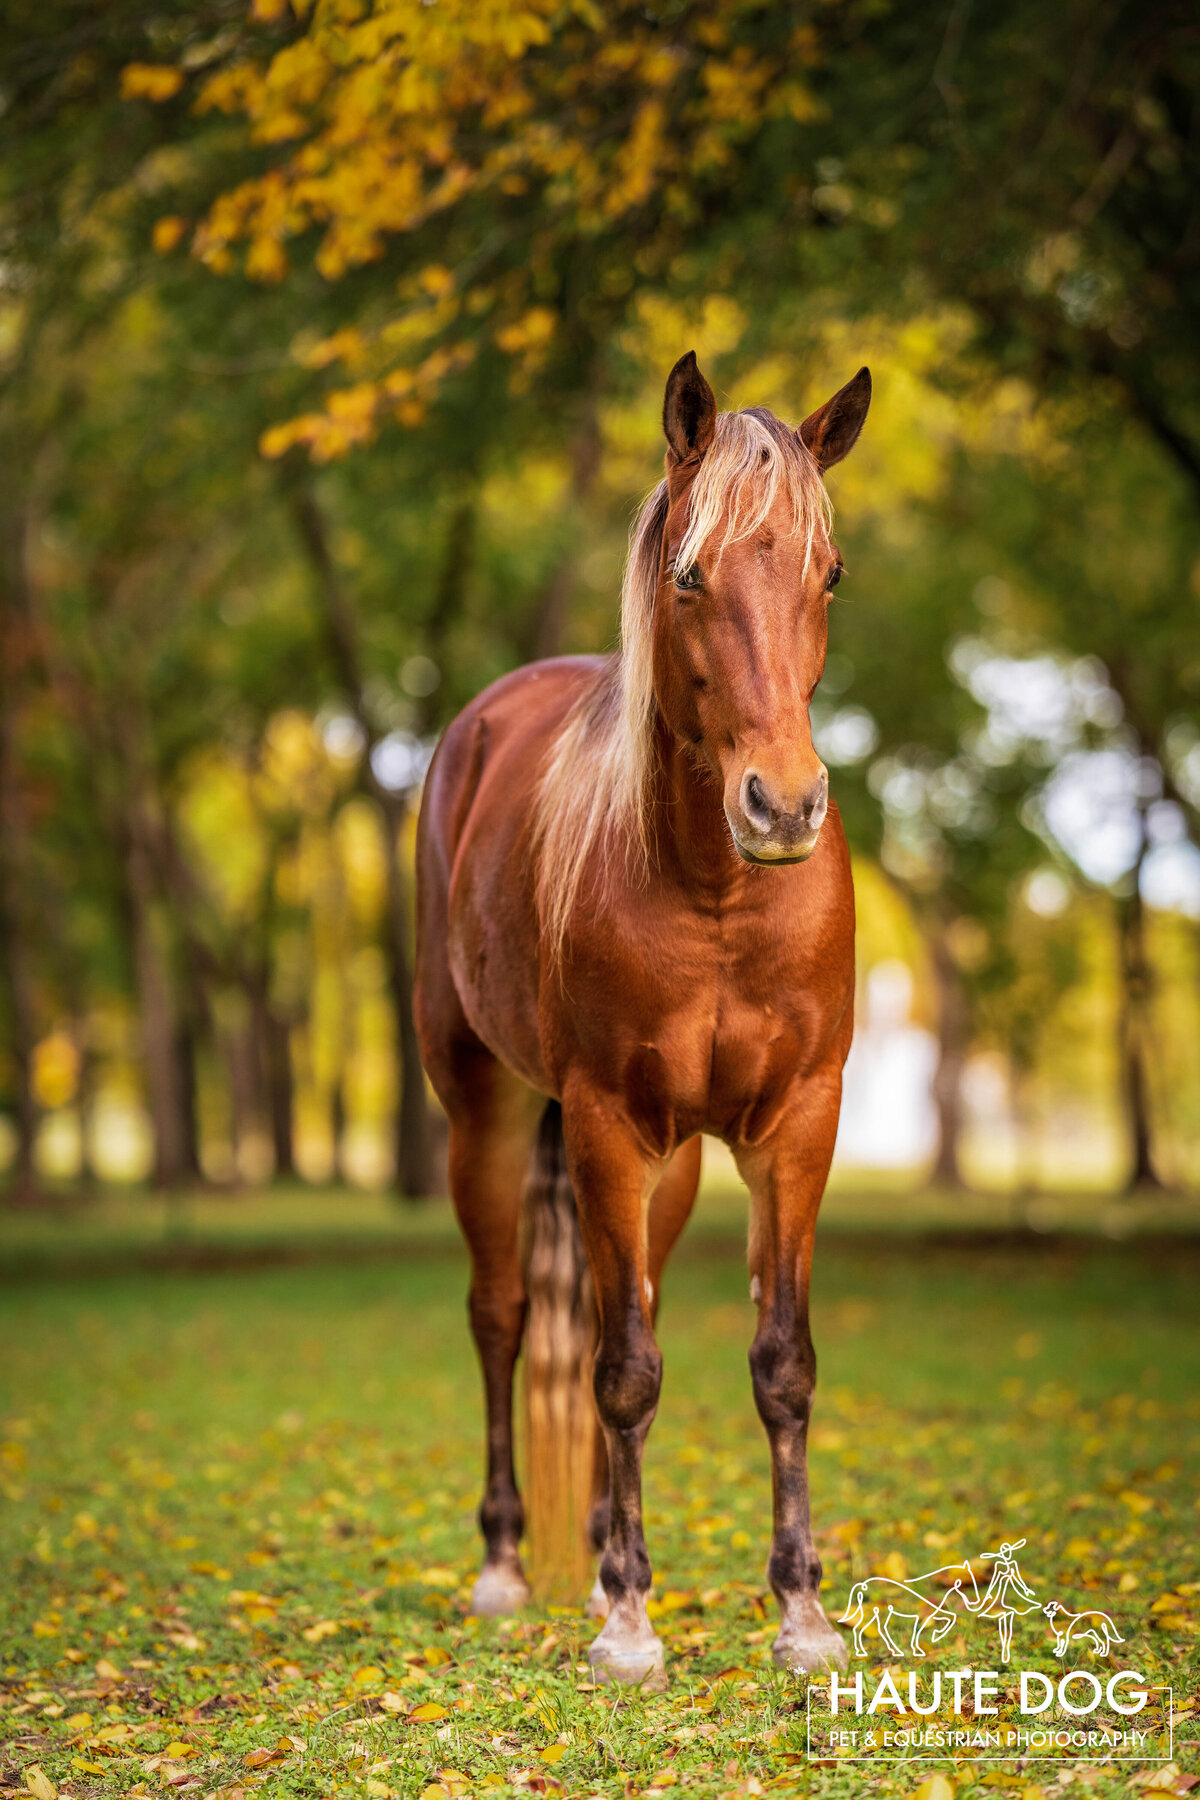 Rocky Mountain Horse stands in a yellow and green autumn tree grove in Coppell, TX.